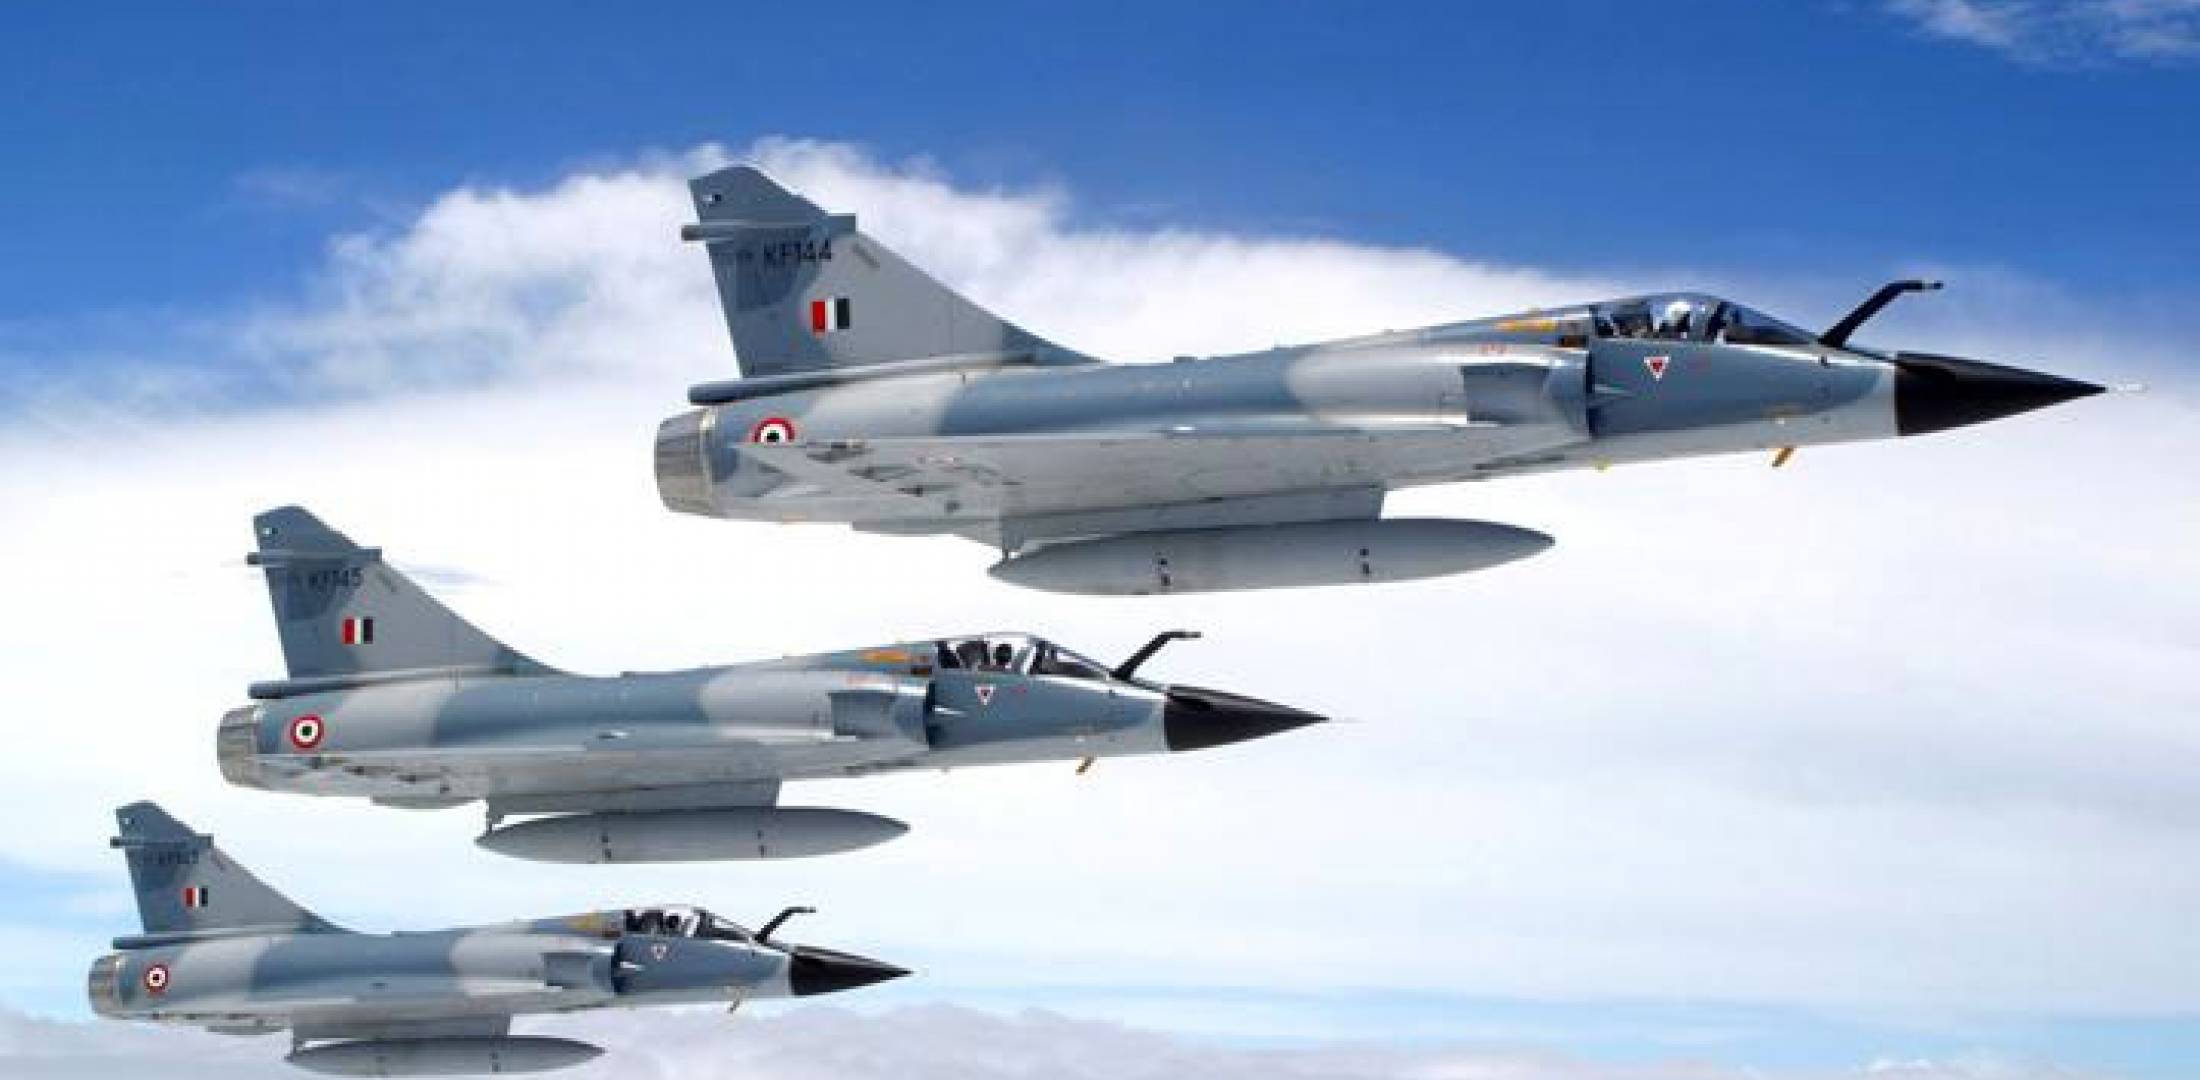 The Indian Air force to acquire 24 second-hand ‘Mirage-2000’ fighter jets: Report